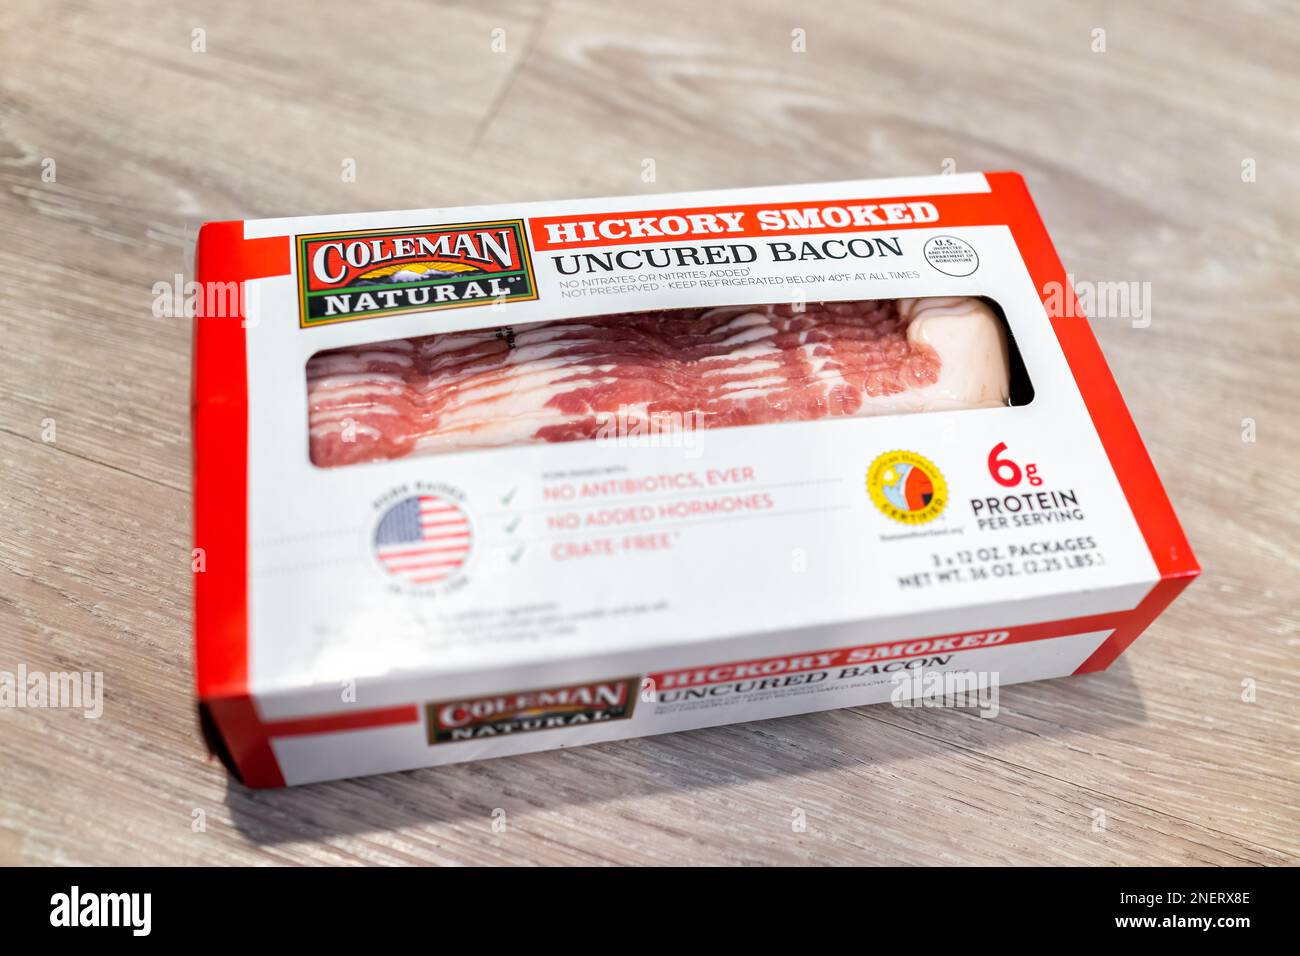 Naples, USA - May 17, 2022: Sign label for product of bulk Coleman natural hickory smoked uncured bacon storebought at Costco with no nitrates Stock Photo